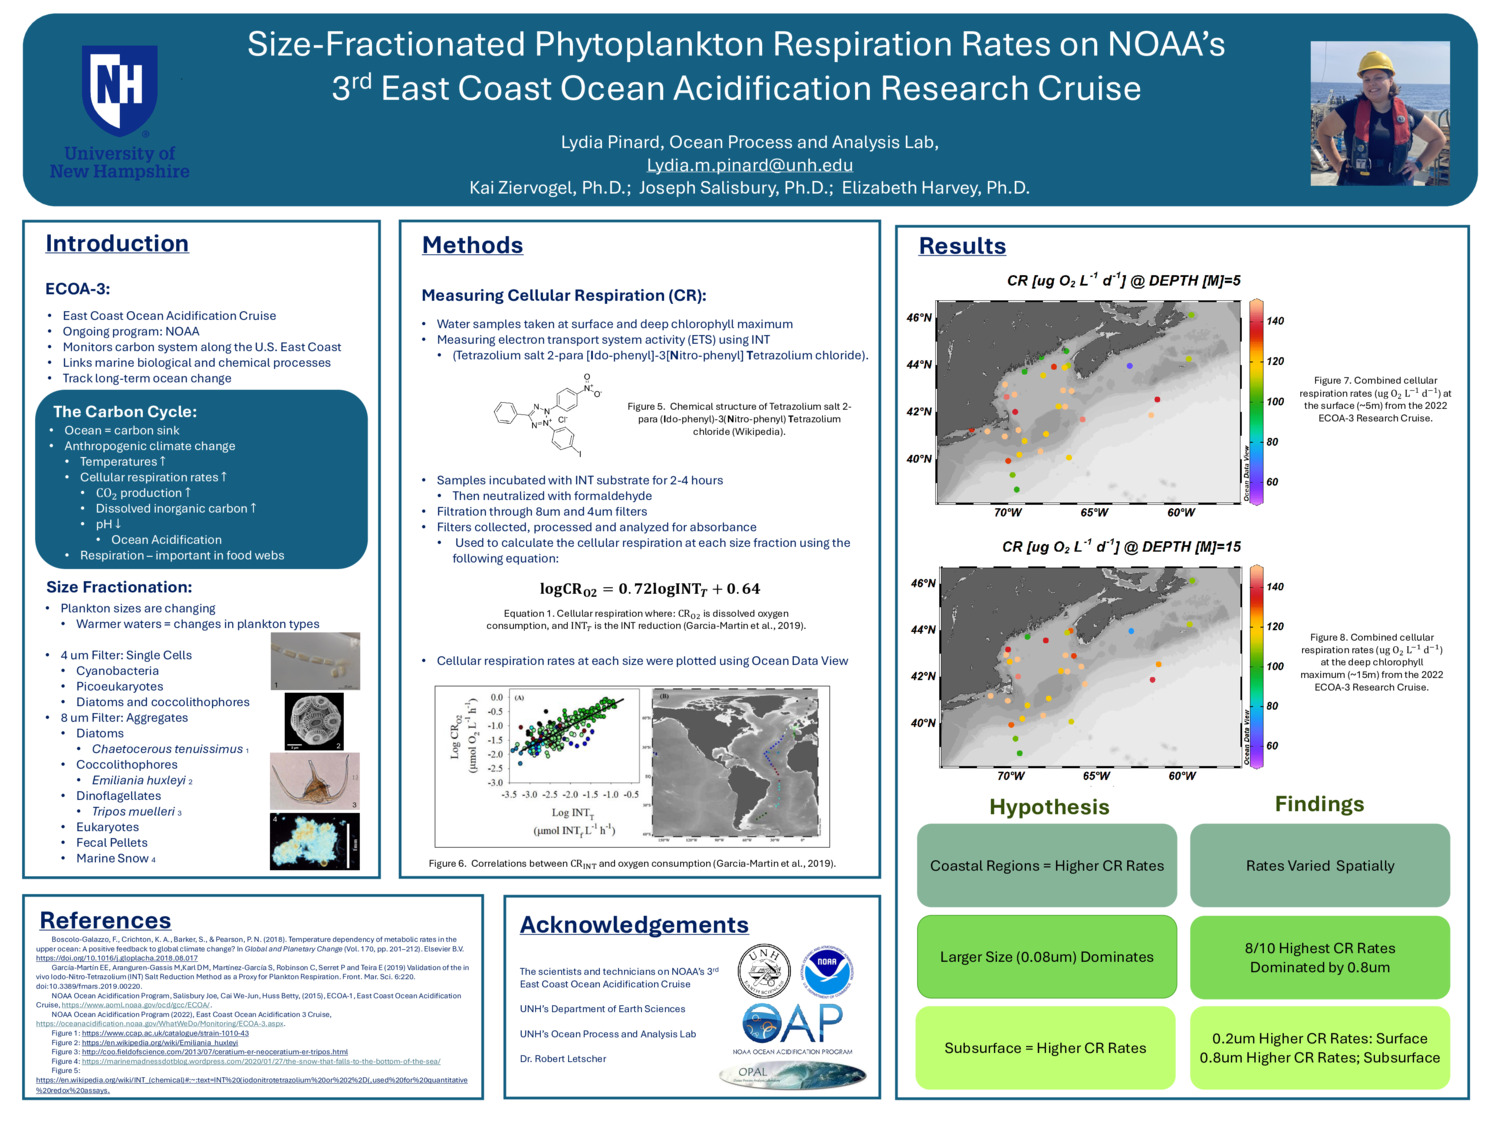 Size-Fractionated Phytoplankton Respiration Rates On Noaa’S  3rd East Coast Ocean Acidification Research Cruise by lydiapinard3